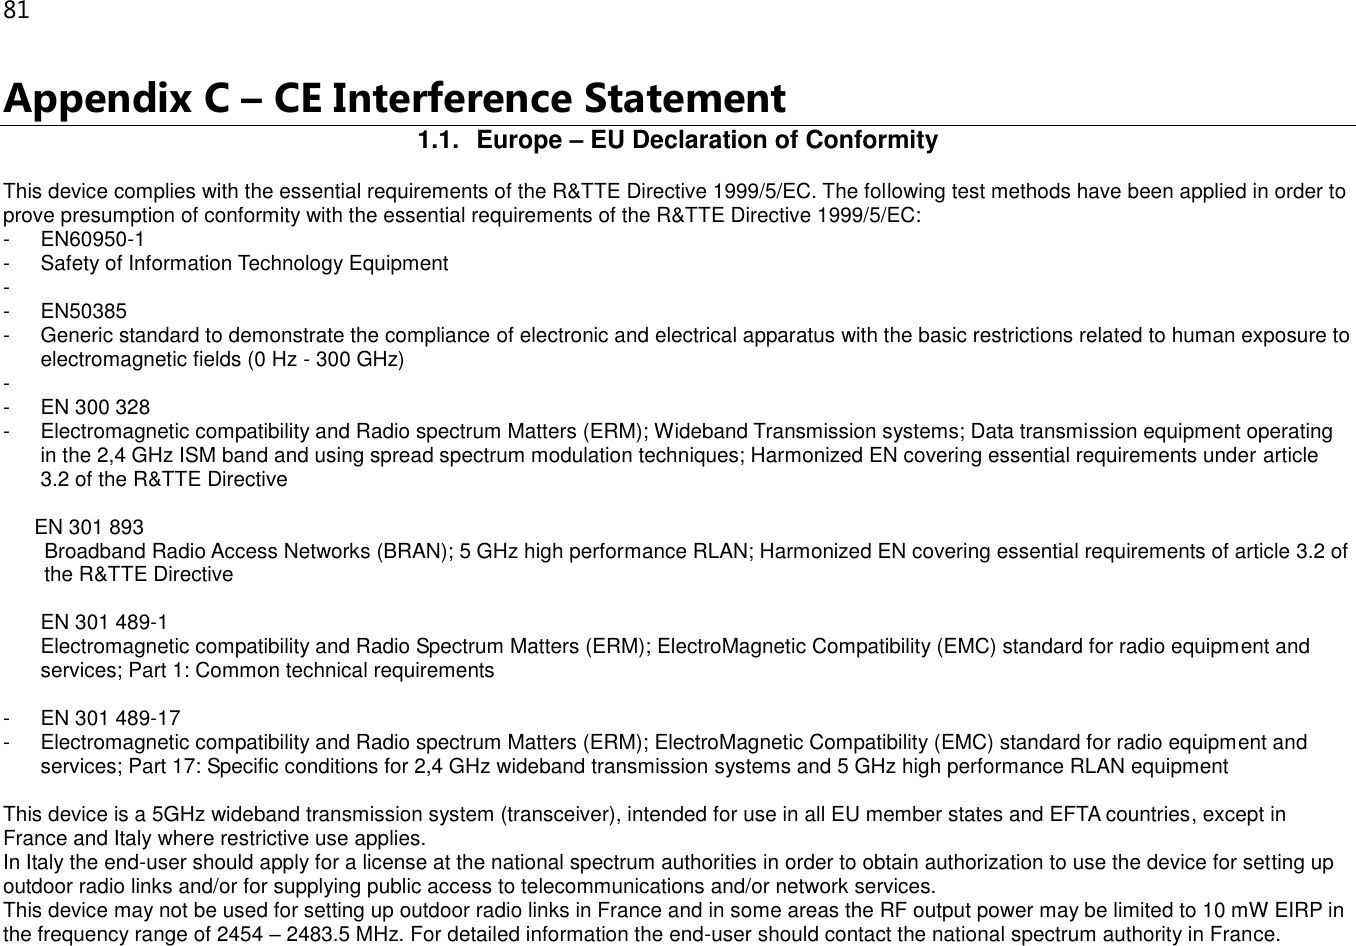 81 Appendix C – CE Interference Statement 1.1.  Europe – EU Declaration of Conformity This device complies with the essential requirements of the R&amp;TTE Directive 1999/5/EC. The following test methods have been applied in order to prove presumption of conformity with the essential requirements of the R&amp;TTE Directive 1999/5/EC: -  EN60950-1 -  Safety of Information Technology Equipment -   -  EN50385 -  Generic standard to demonstrate the compliance of electronic and electrical apparatus with the basic restrictions related to human exposure to electromagnetic fields (0 Hz - 300 GHz) -   -  EN 300 328 -  Electromagnetic compatibility and Radio spectrum Matters (ERM); Wideband Transmission systems; Data transmission equipment operating in the 2,4 GHz ISM band and using spread spectrum modulation techniques; Harmonized EN covering essential requirements under article 3.2 of the R&amp;TTE Directive  EN 301 893  Broadband Radio Access Networks (BRAN); 5 GHz high performance RLAN; Harmonized EN covering essential requirements of article 3.2 of the R&amp;TTE Directive  EN 301 489-1  Electromagnetic compatibility and Radio Spectrum Matters (ERM); ElectroMagnetic Compatibility (EMC) standard for radio equipment and services; Part 1: Common technical requirements  -  EN 301 489-17 -  Electromagnetic compatibility and Radio spectrum Matters (ERM); ElectroMagnetic Compatibility (EMC) standard for radio equipment and services; Part 17: Specific conditions for 2,4 GHz wideband transmission systems and 5 GHz high performance RLAN equipment  This device is a 5GHz wideband transmission system (transceiver), intended for use in all EU member states and EFTA countries, except in France and Italy where restrictive use applies. In Italy the end-user should apply for a license at the national spectrum authorities in order to obtain authorization to use the device for setting up outdoor radio links and/or for supplying public access to telecommunications and/or network services. This device may not be used for setting up outdoor radio links in France and in some areas the RF output power may be limited to 10 mW EIRP in the frequency range of 2454 – 2483.5 MHz. For detailed information the end-user should contact the national spectrum authority in France. 